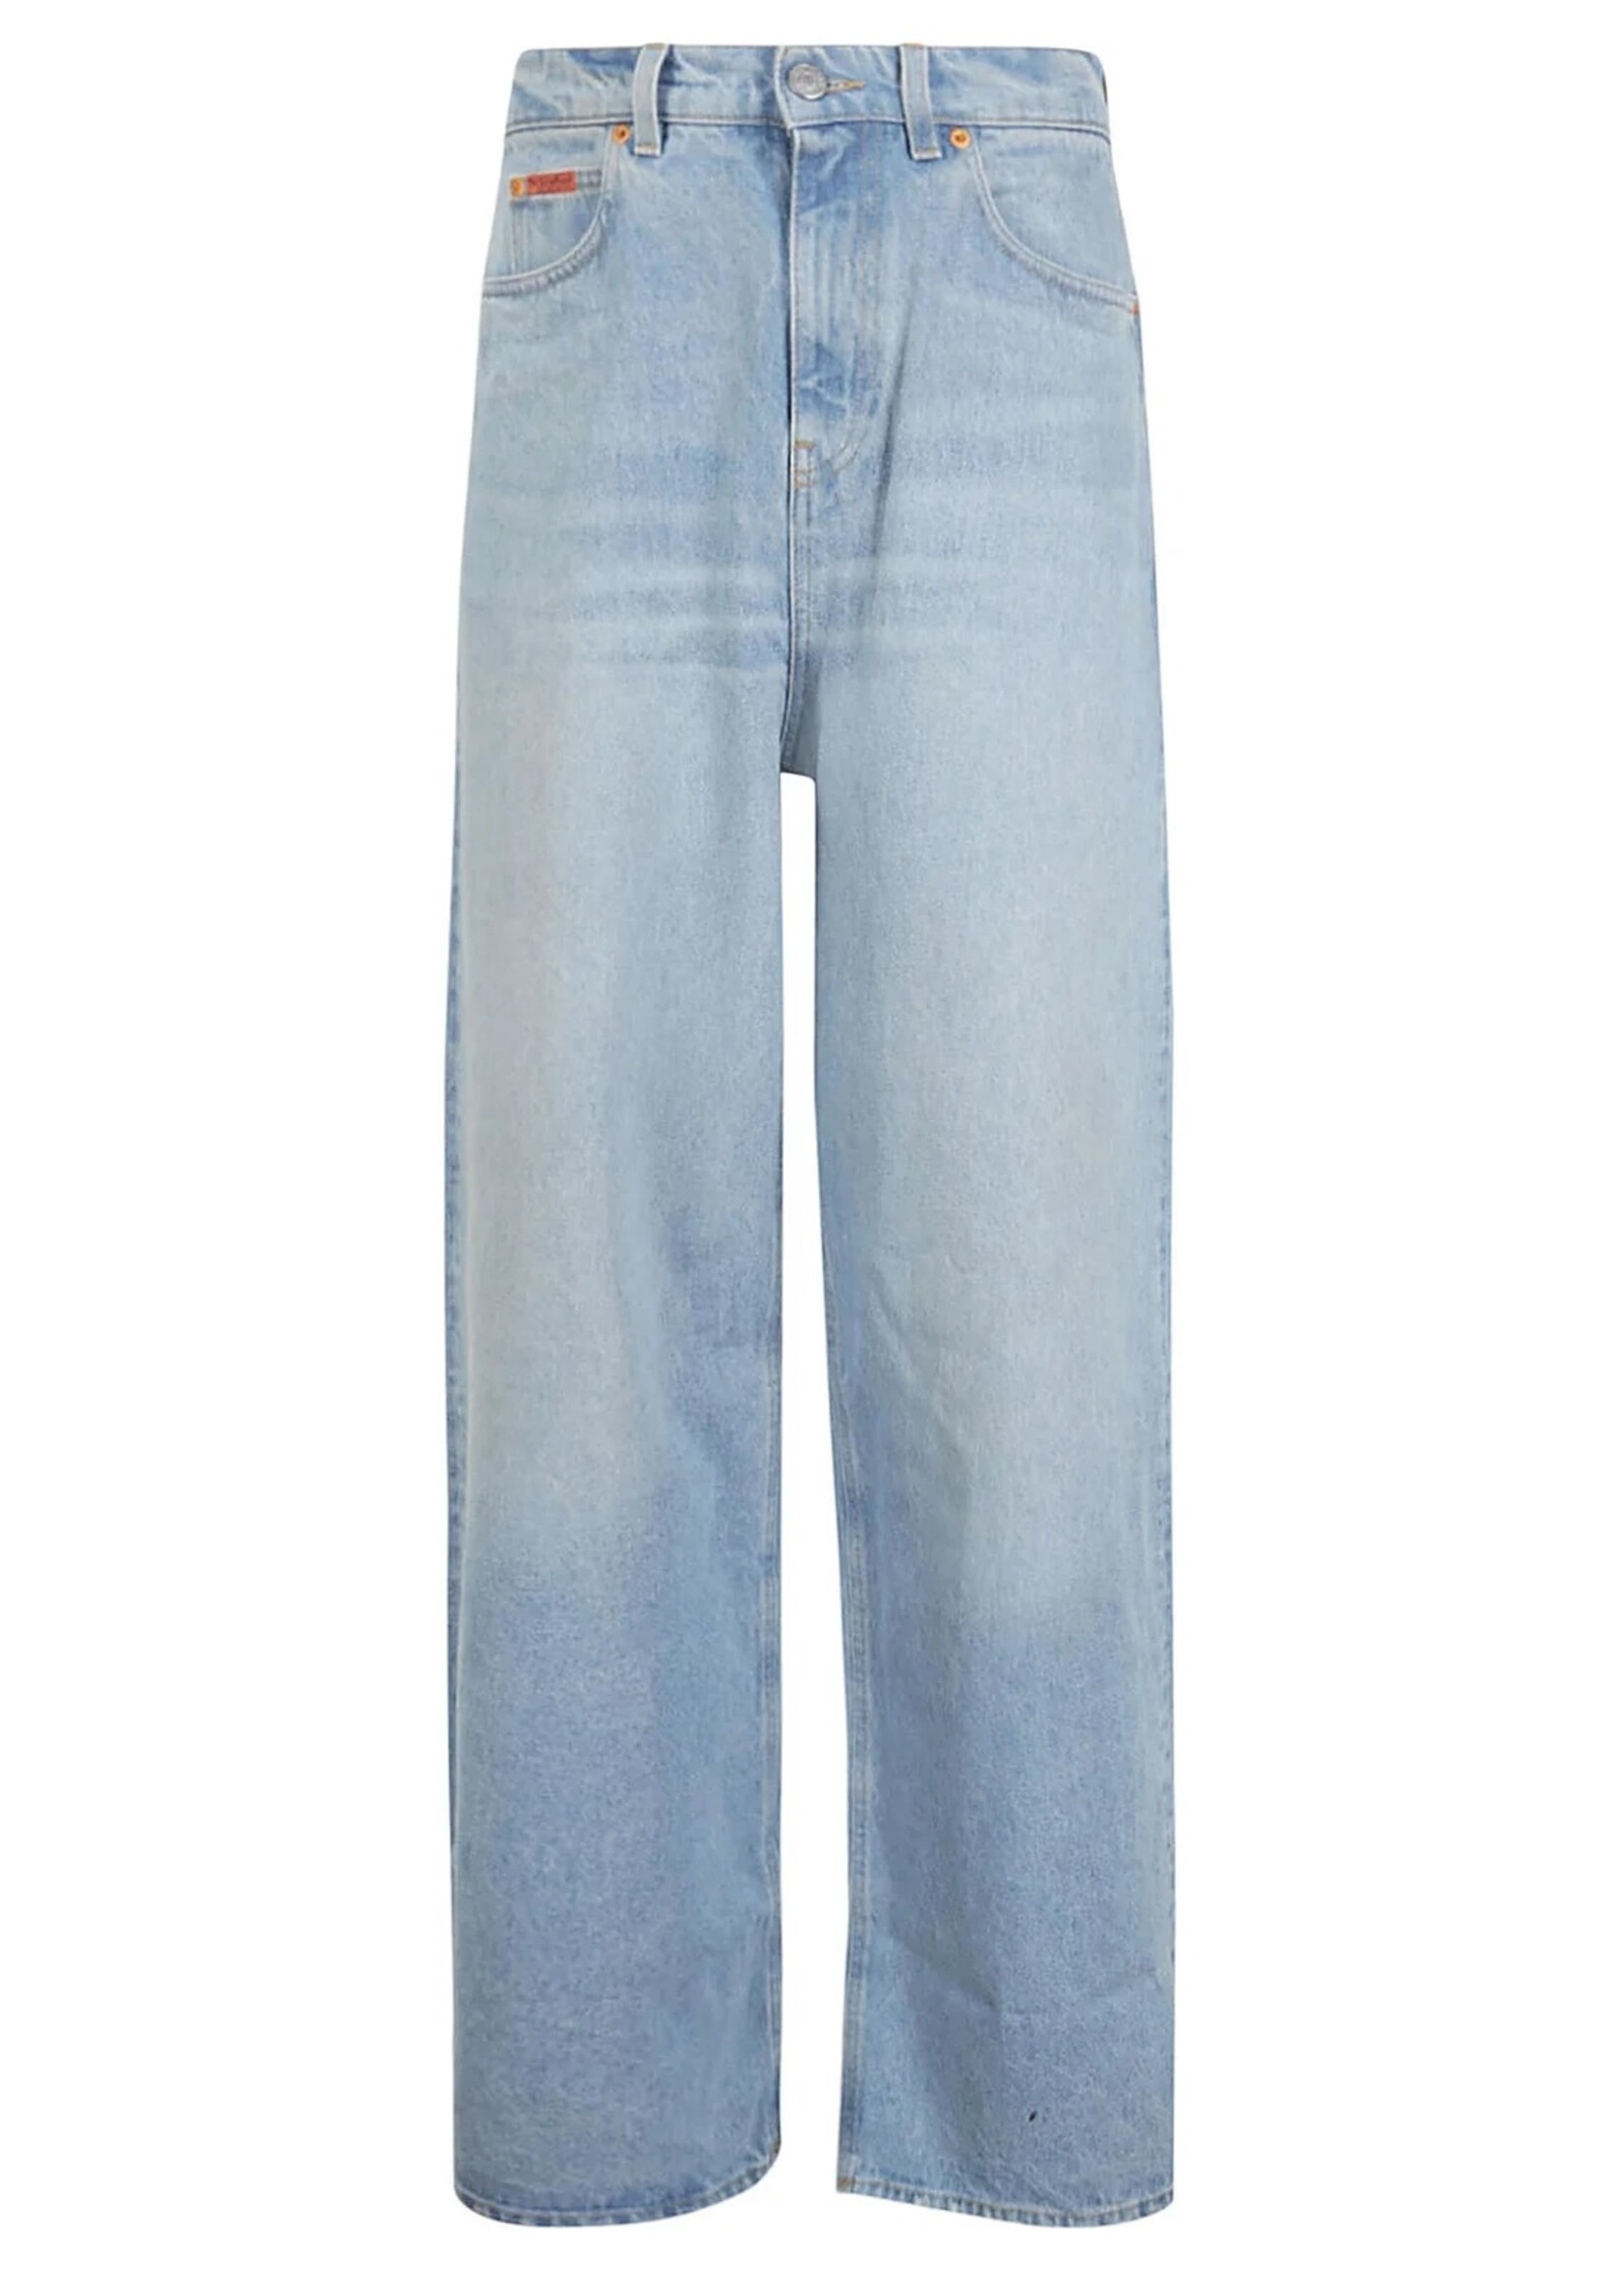 MARTINE ROSE Extended Wide Leg Jeans in Bleached Wash